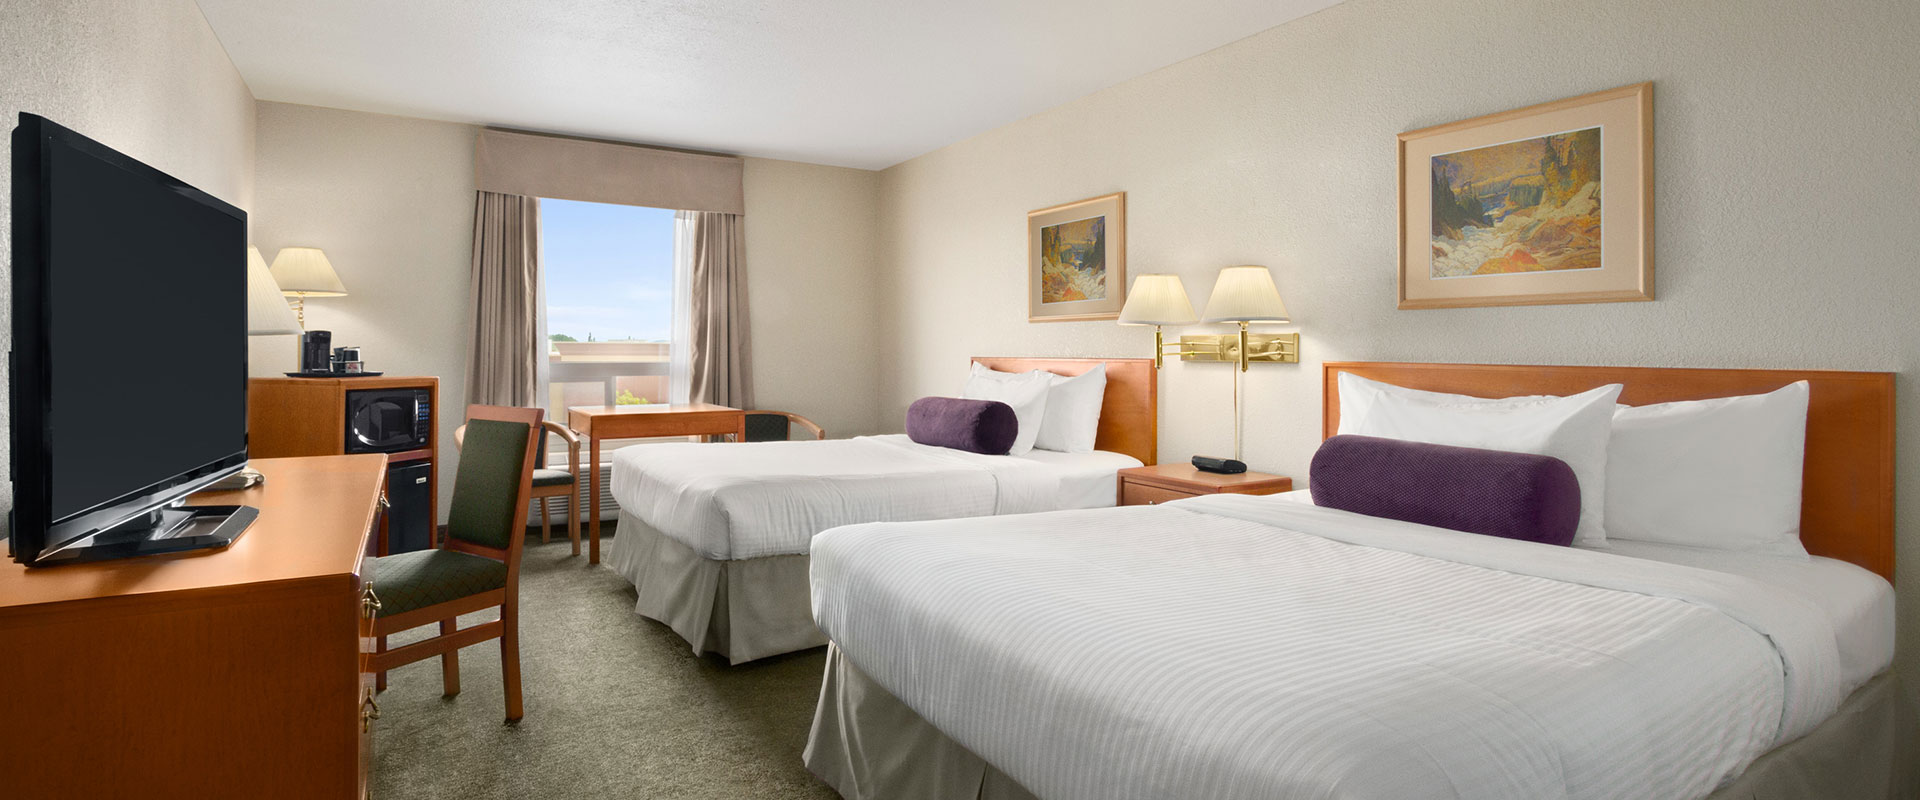 Two bed business class suite with microwave, TV, work table, lamps and chairs at Days Inn Red Deer, Alberta.
